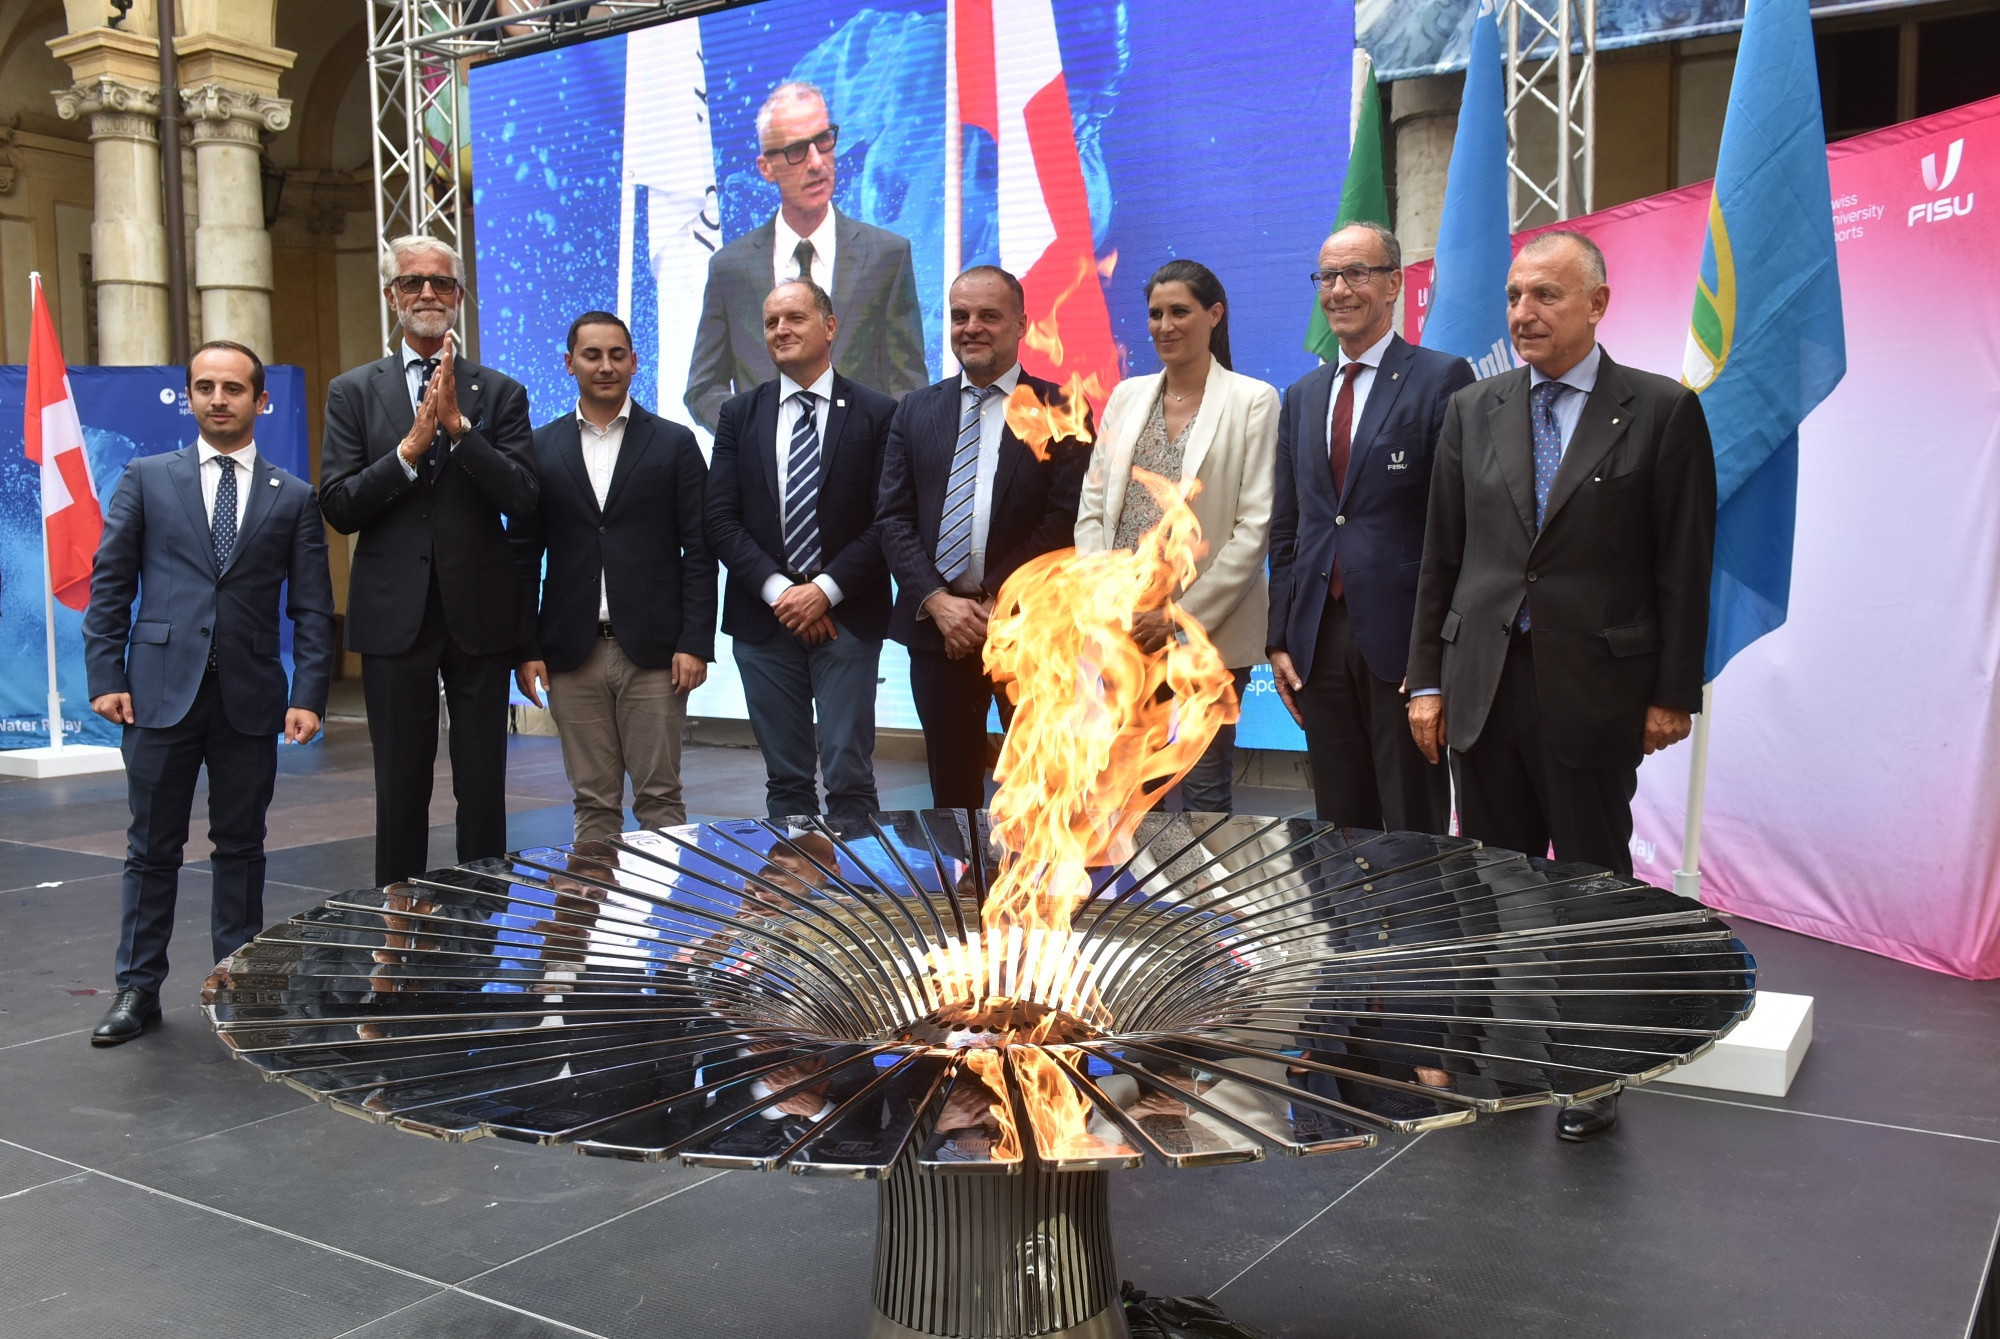 The 2021 International Day of University Sport included the beginning of the Flame Relay for the 2021 Winter Universiade in Lucerne, which was later cancelled ©FISU